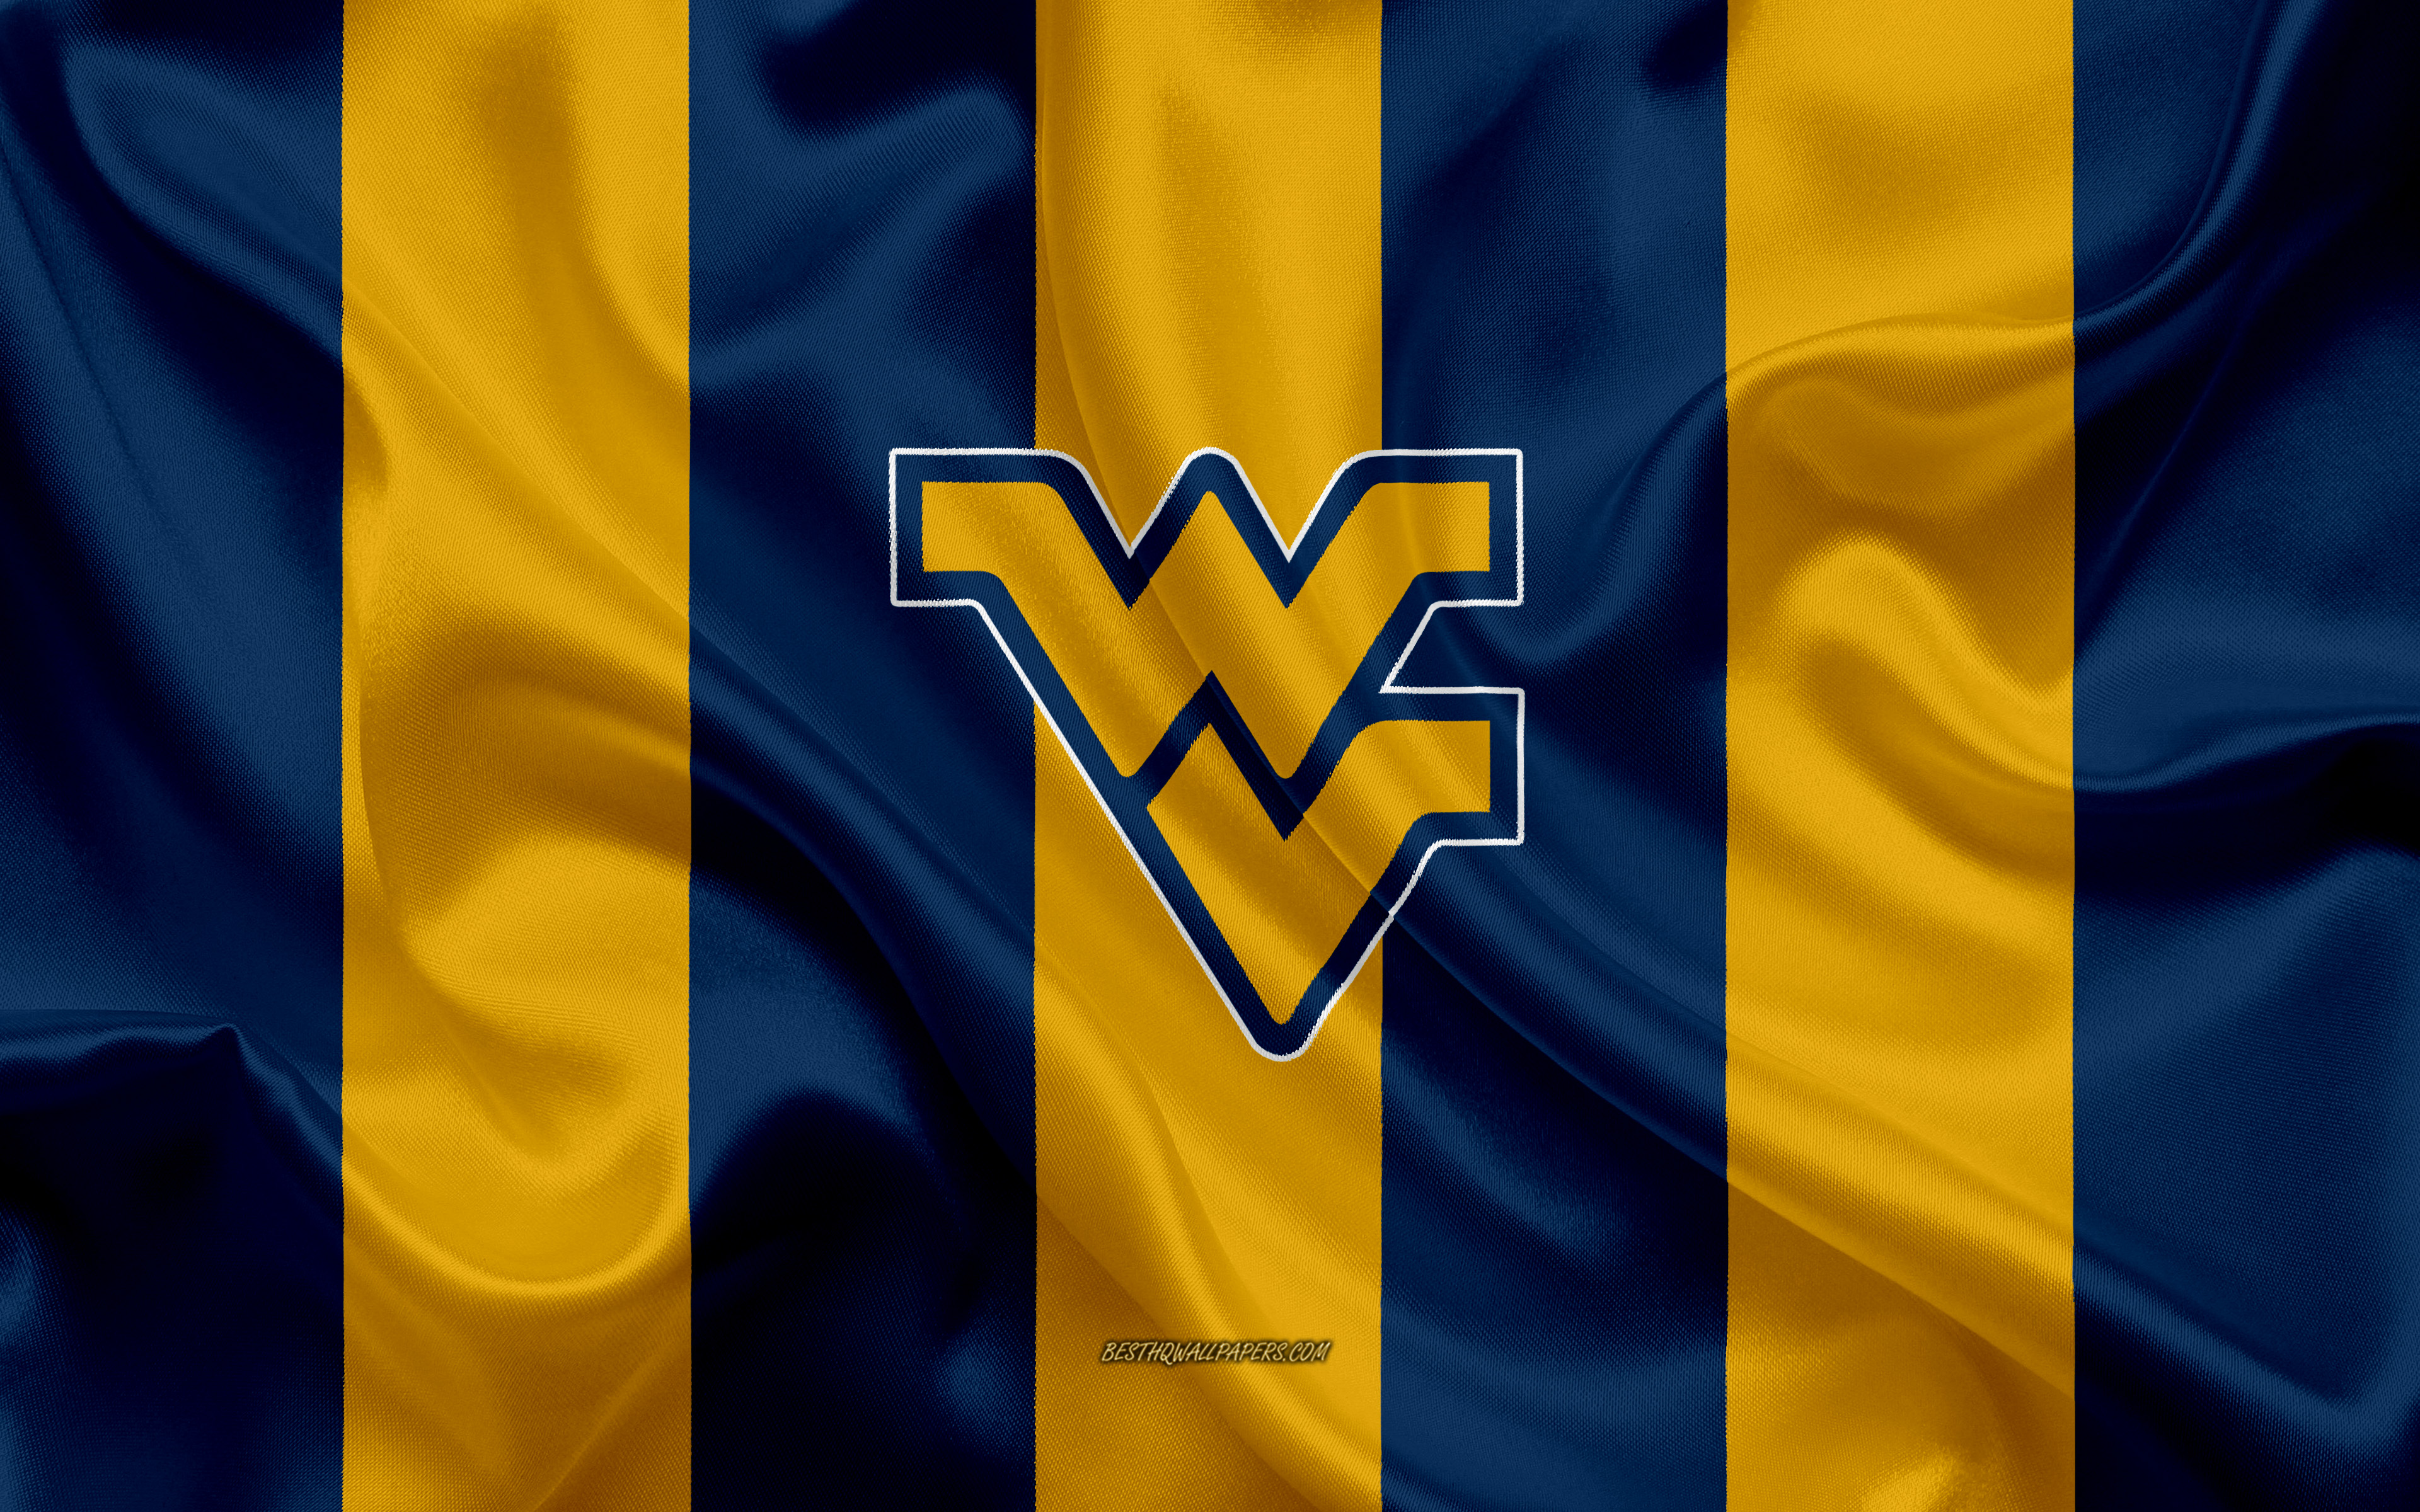 Download Wallpaper West Virginia Mountaineers, American Football Team, Emblem, Silk Flag, Yellow Blue Silk Texture, NCAA, West Virginia Mountaineers Logo, Morgantown, West Virginia, USA, American Football For Desktop With Resolution 3840x2400. High